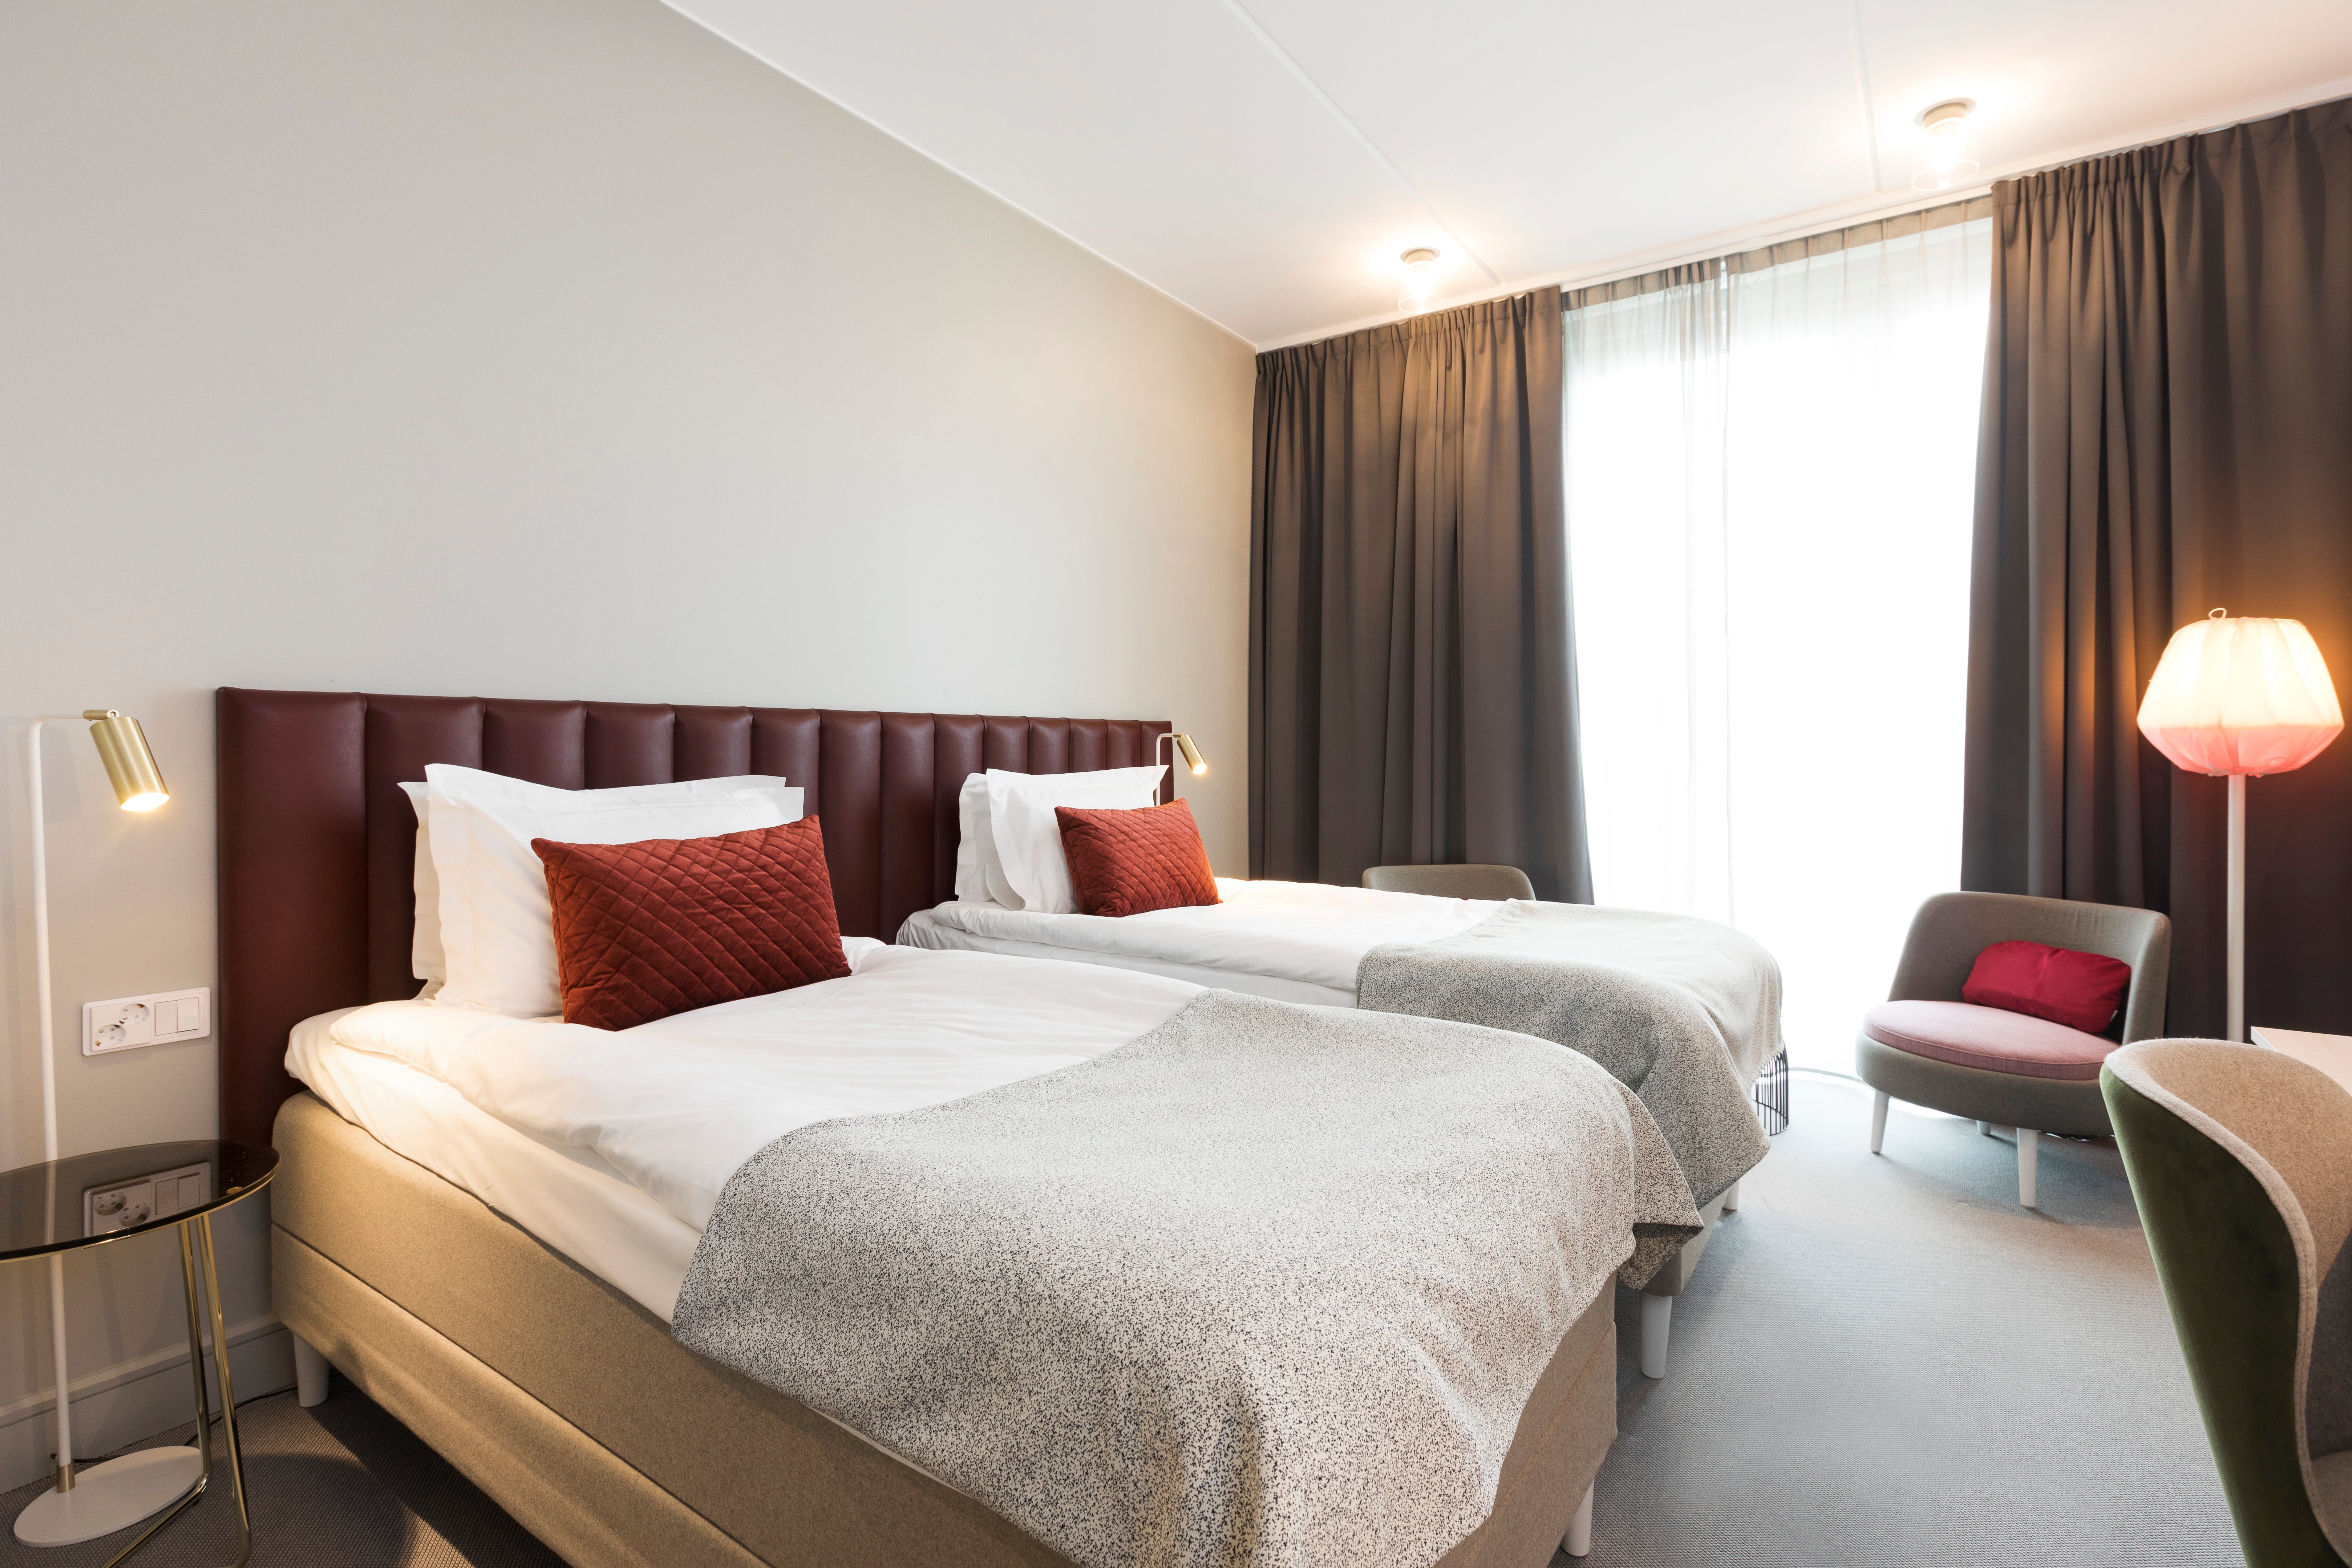 Bright hotel room with two single beds next to each other, burgundy headboard and armchairs